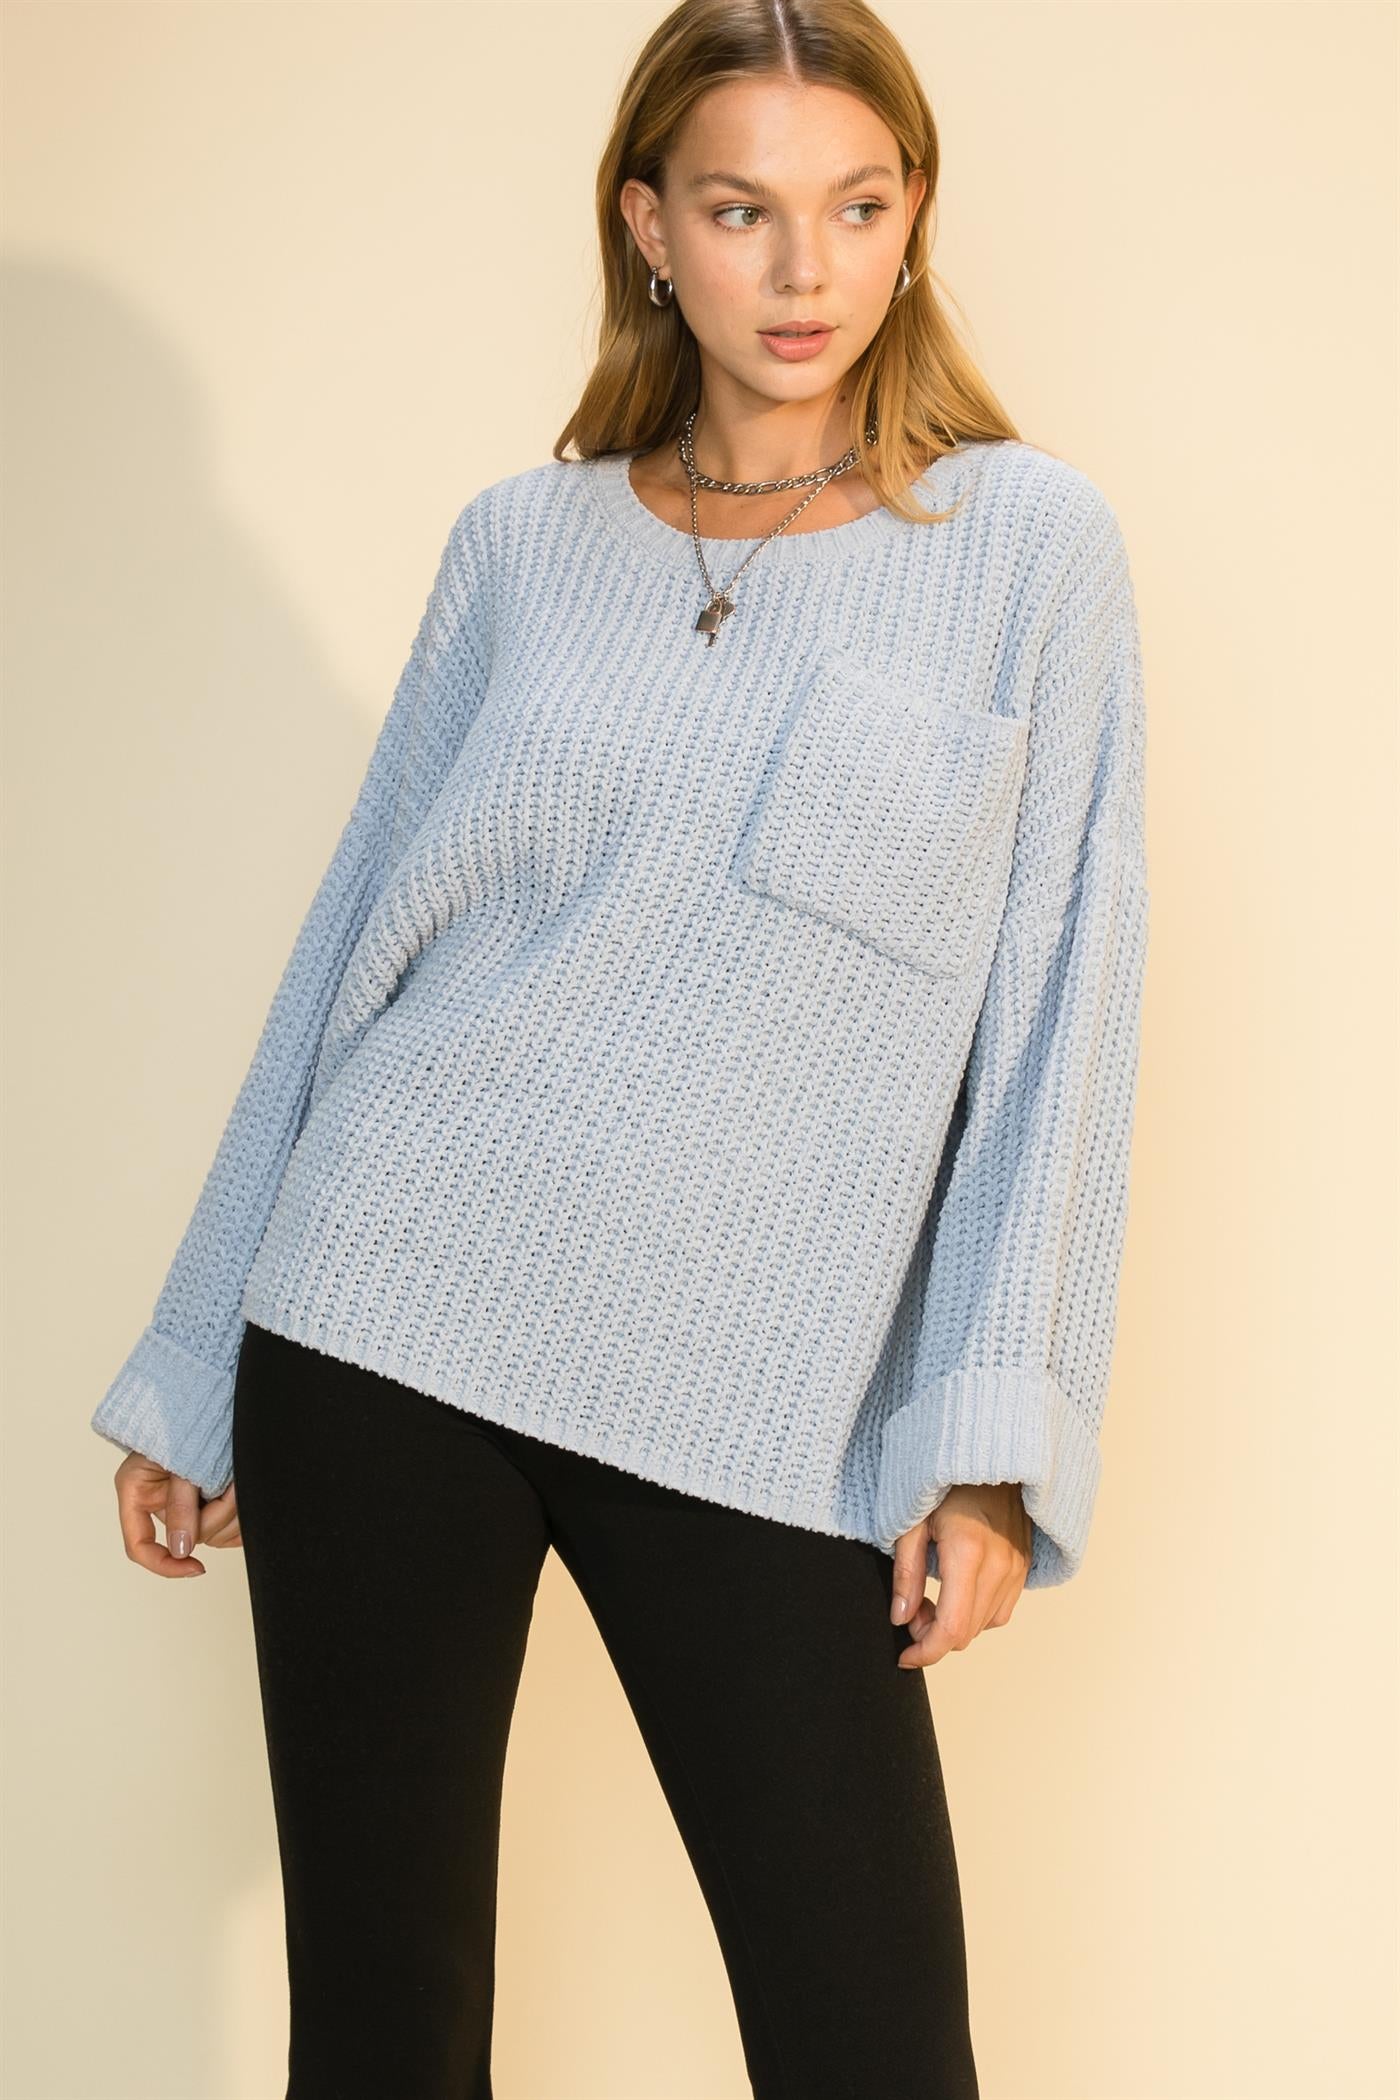 Let's Chill Sweater in Blue & Charcoal